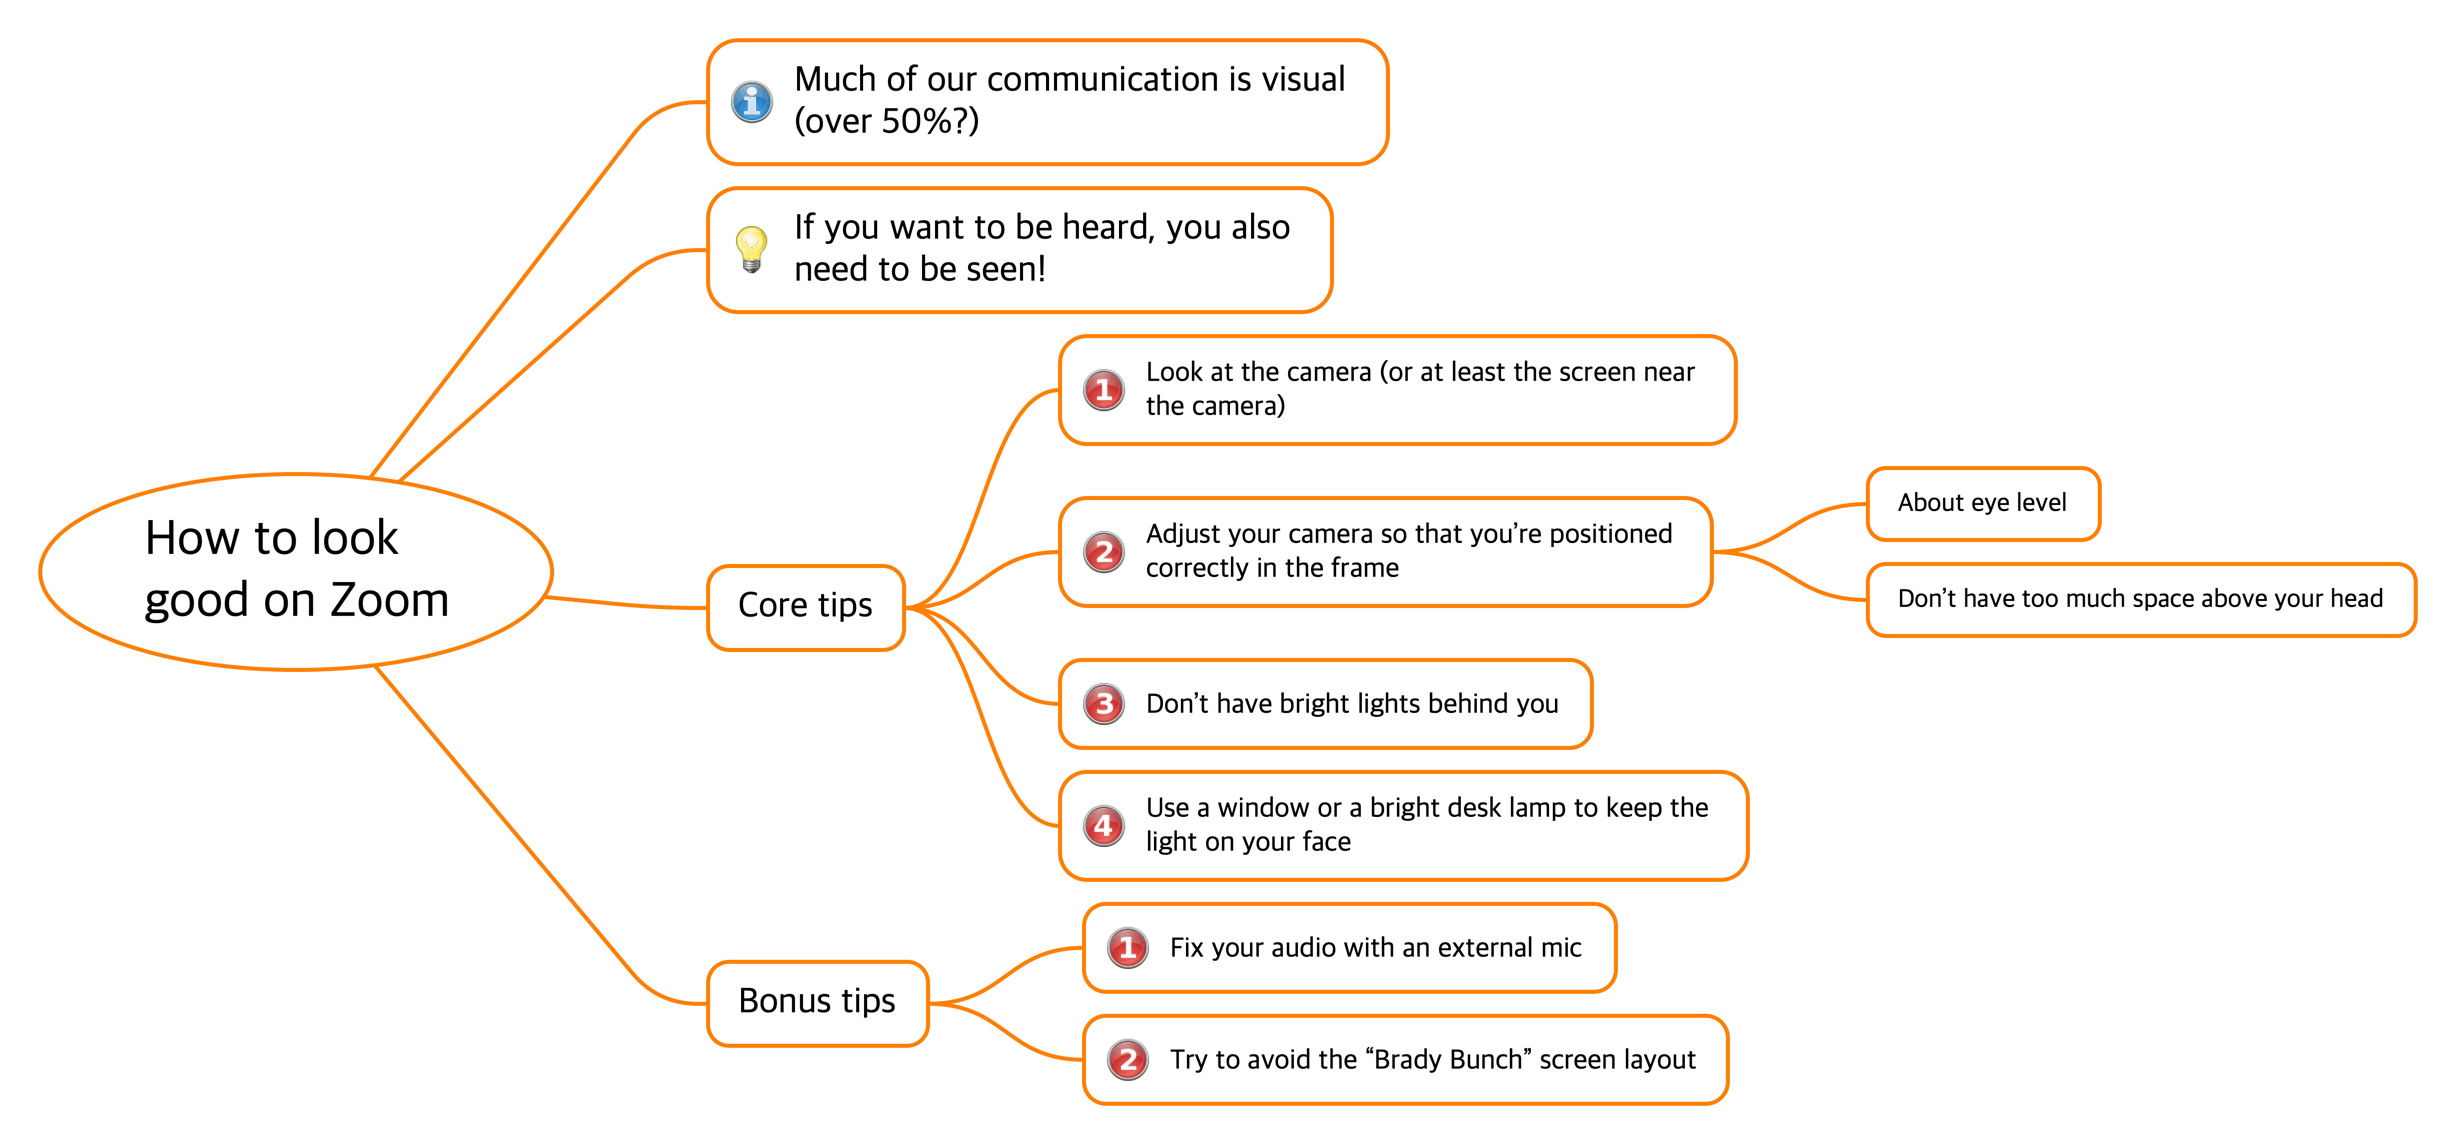 Mind map of "How to look good on Zoom"